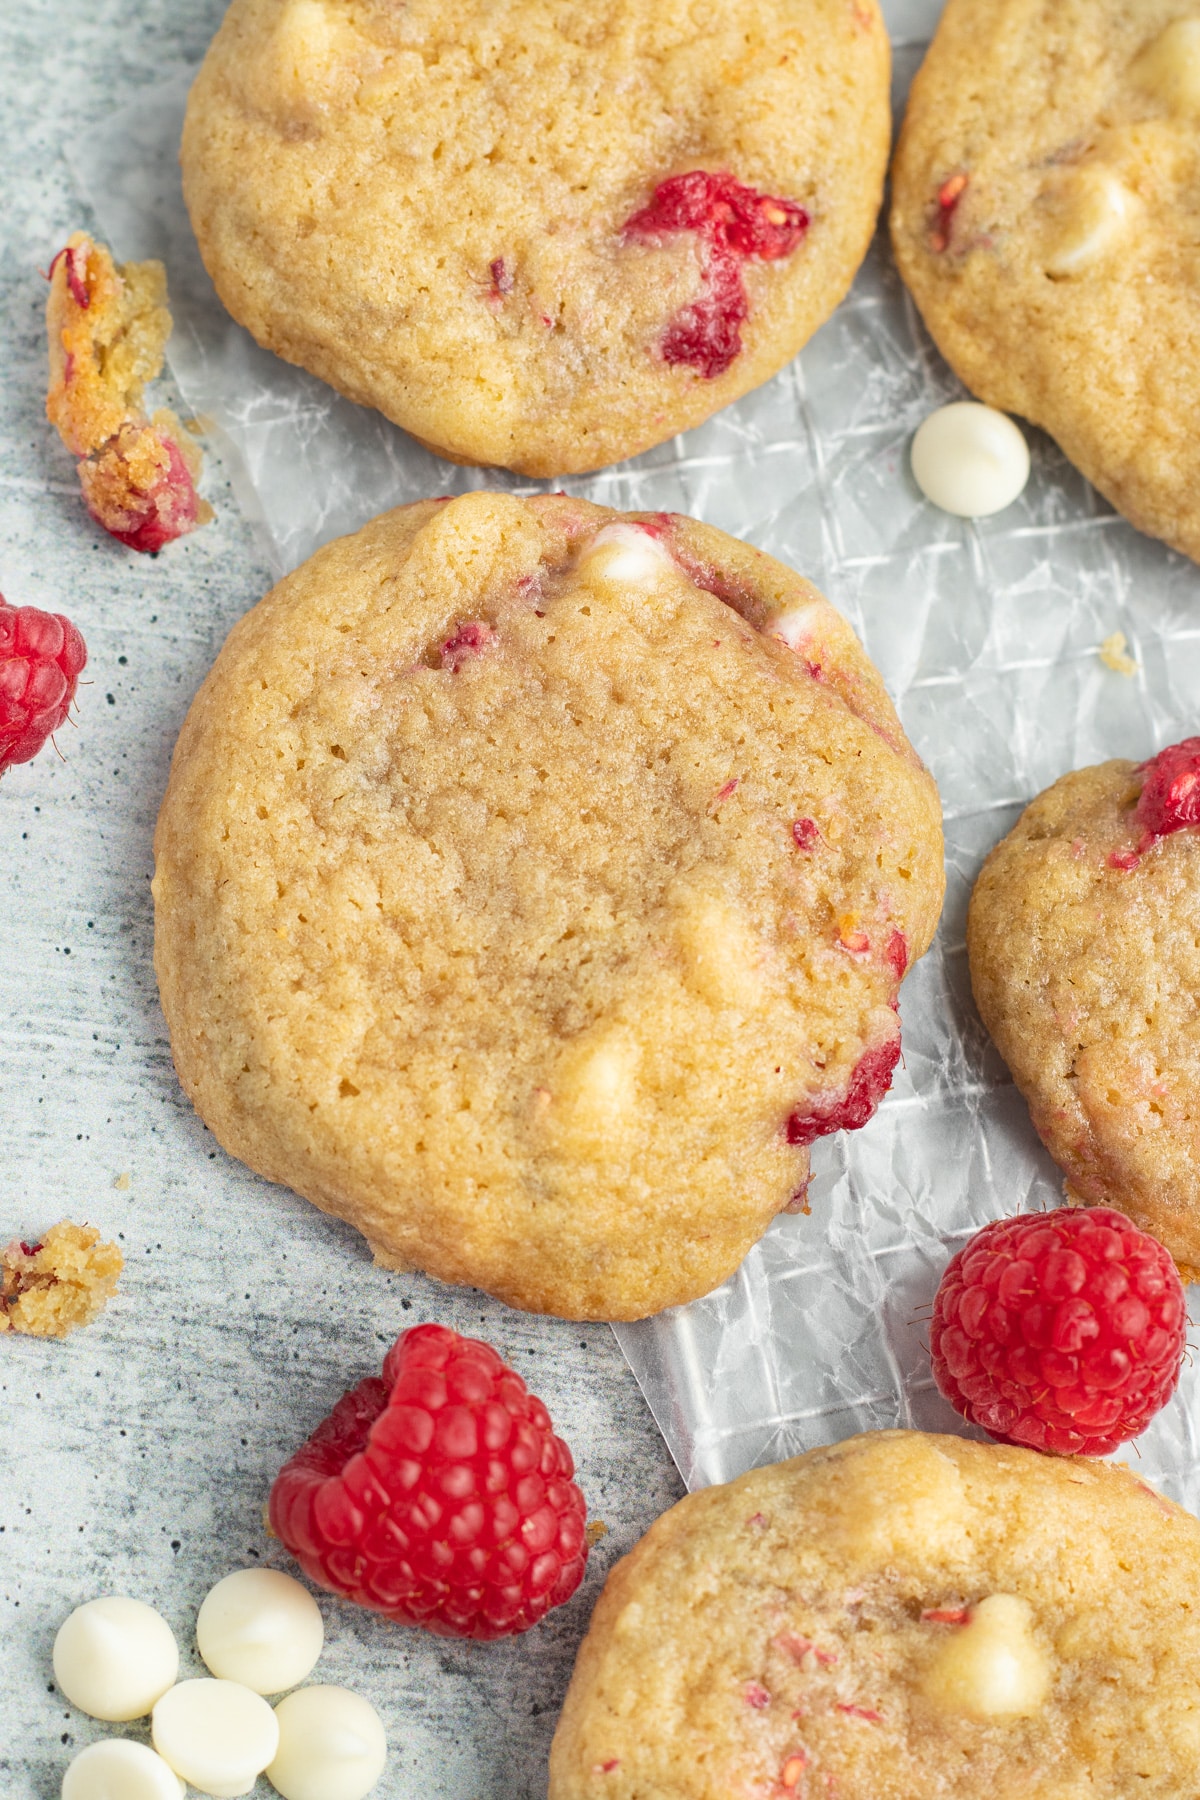 Picture of raspberry and white chocolate cookies.